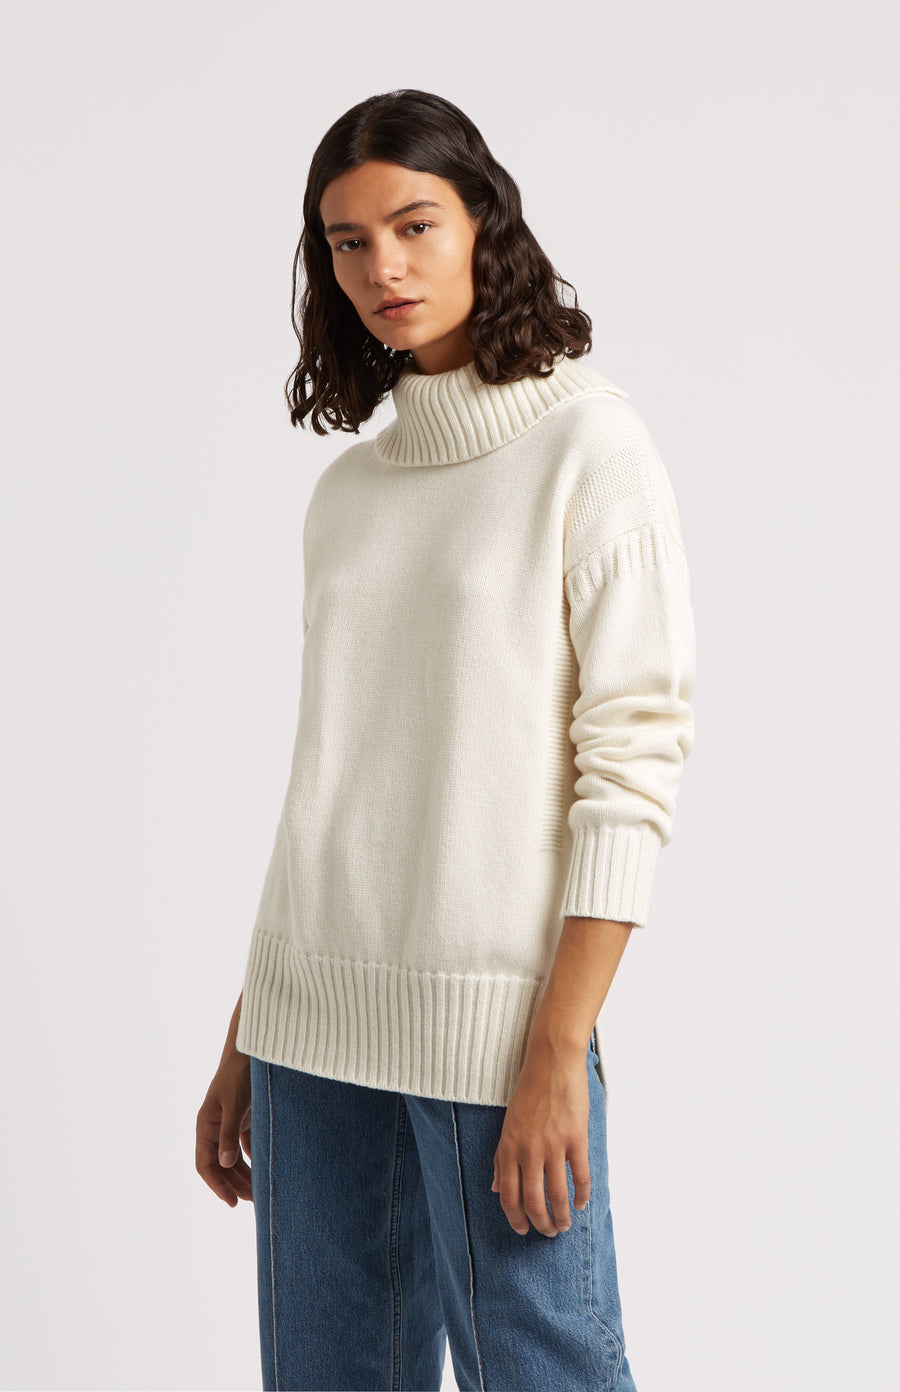 Women's Off White Guernsey Roll Neck Cashmere Jumper model Close Up - Pringle of Scotland